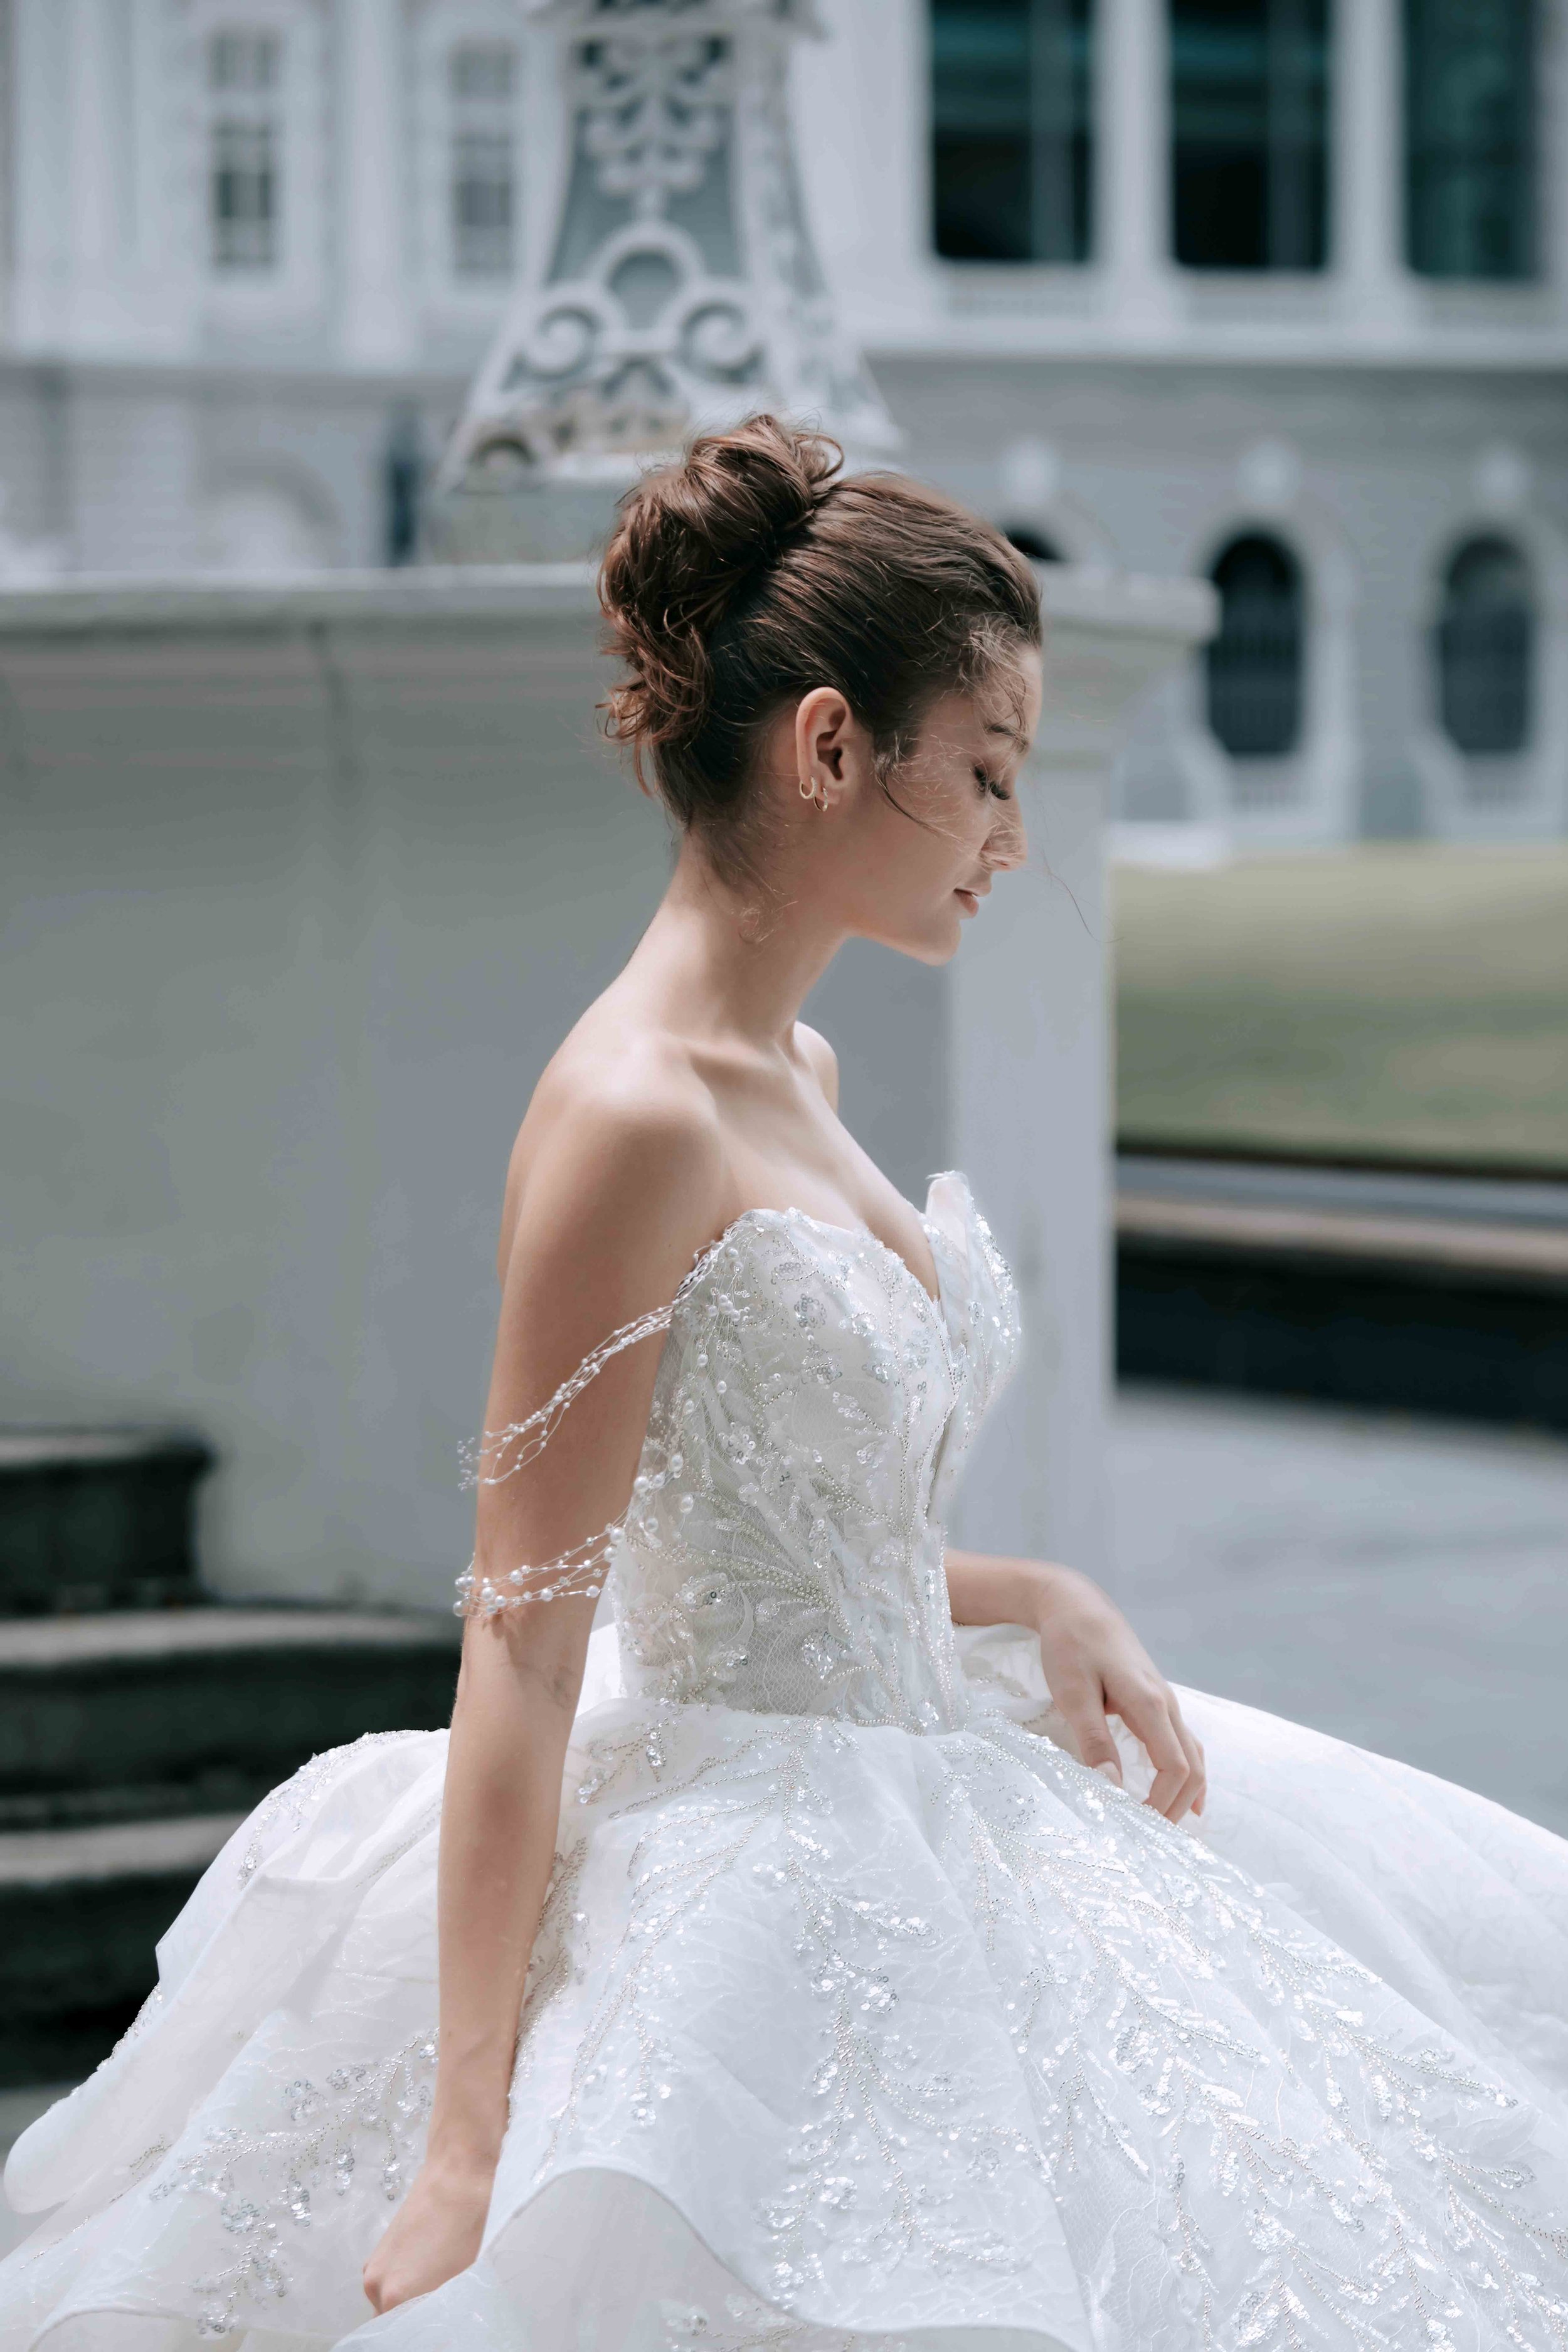 Bridefully Yours | Weddings Gowns in Singapore